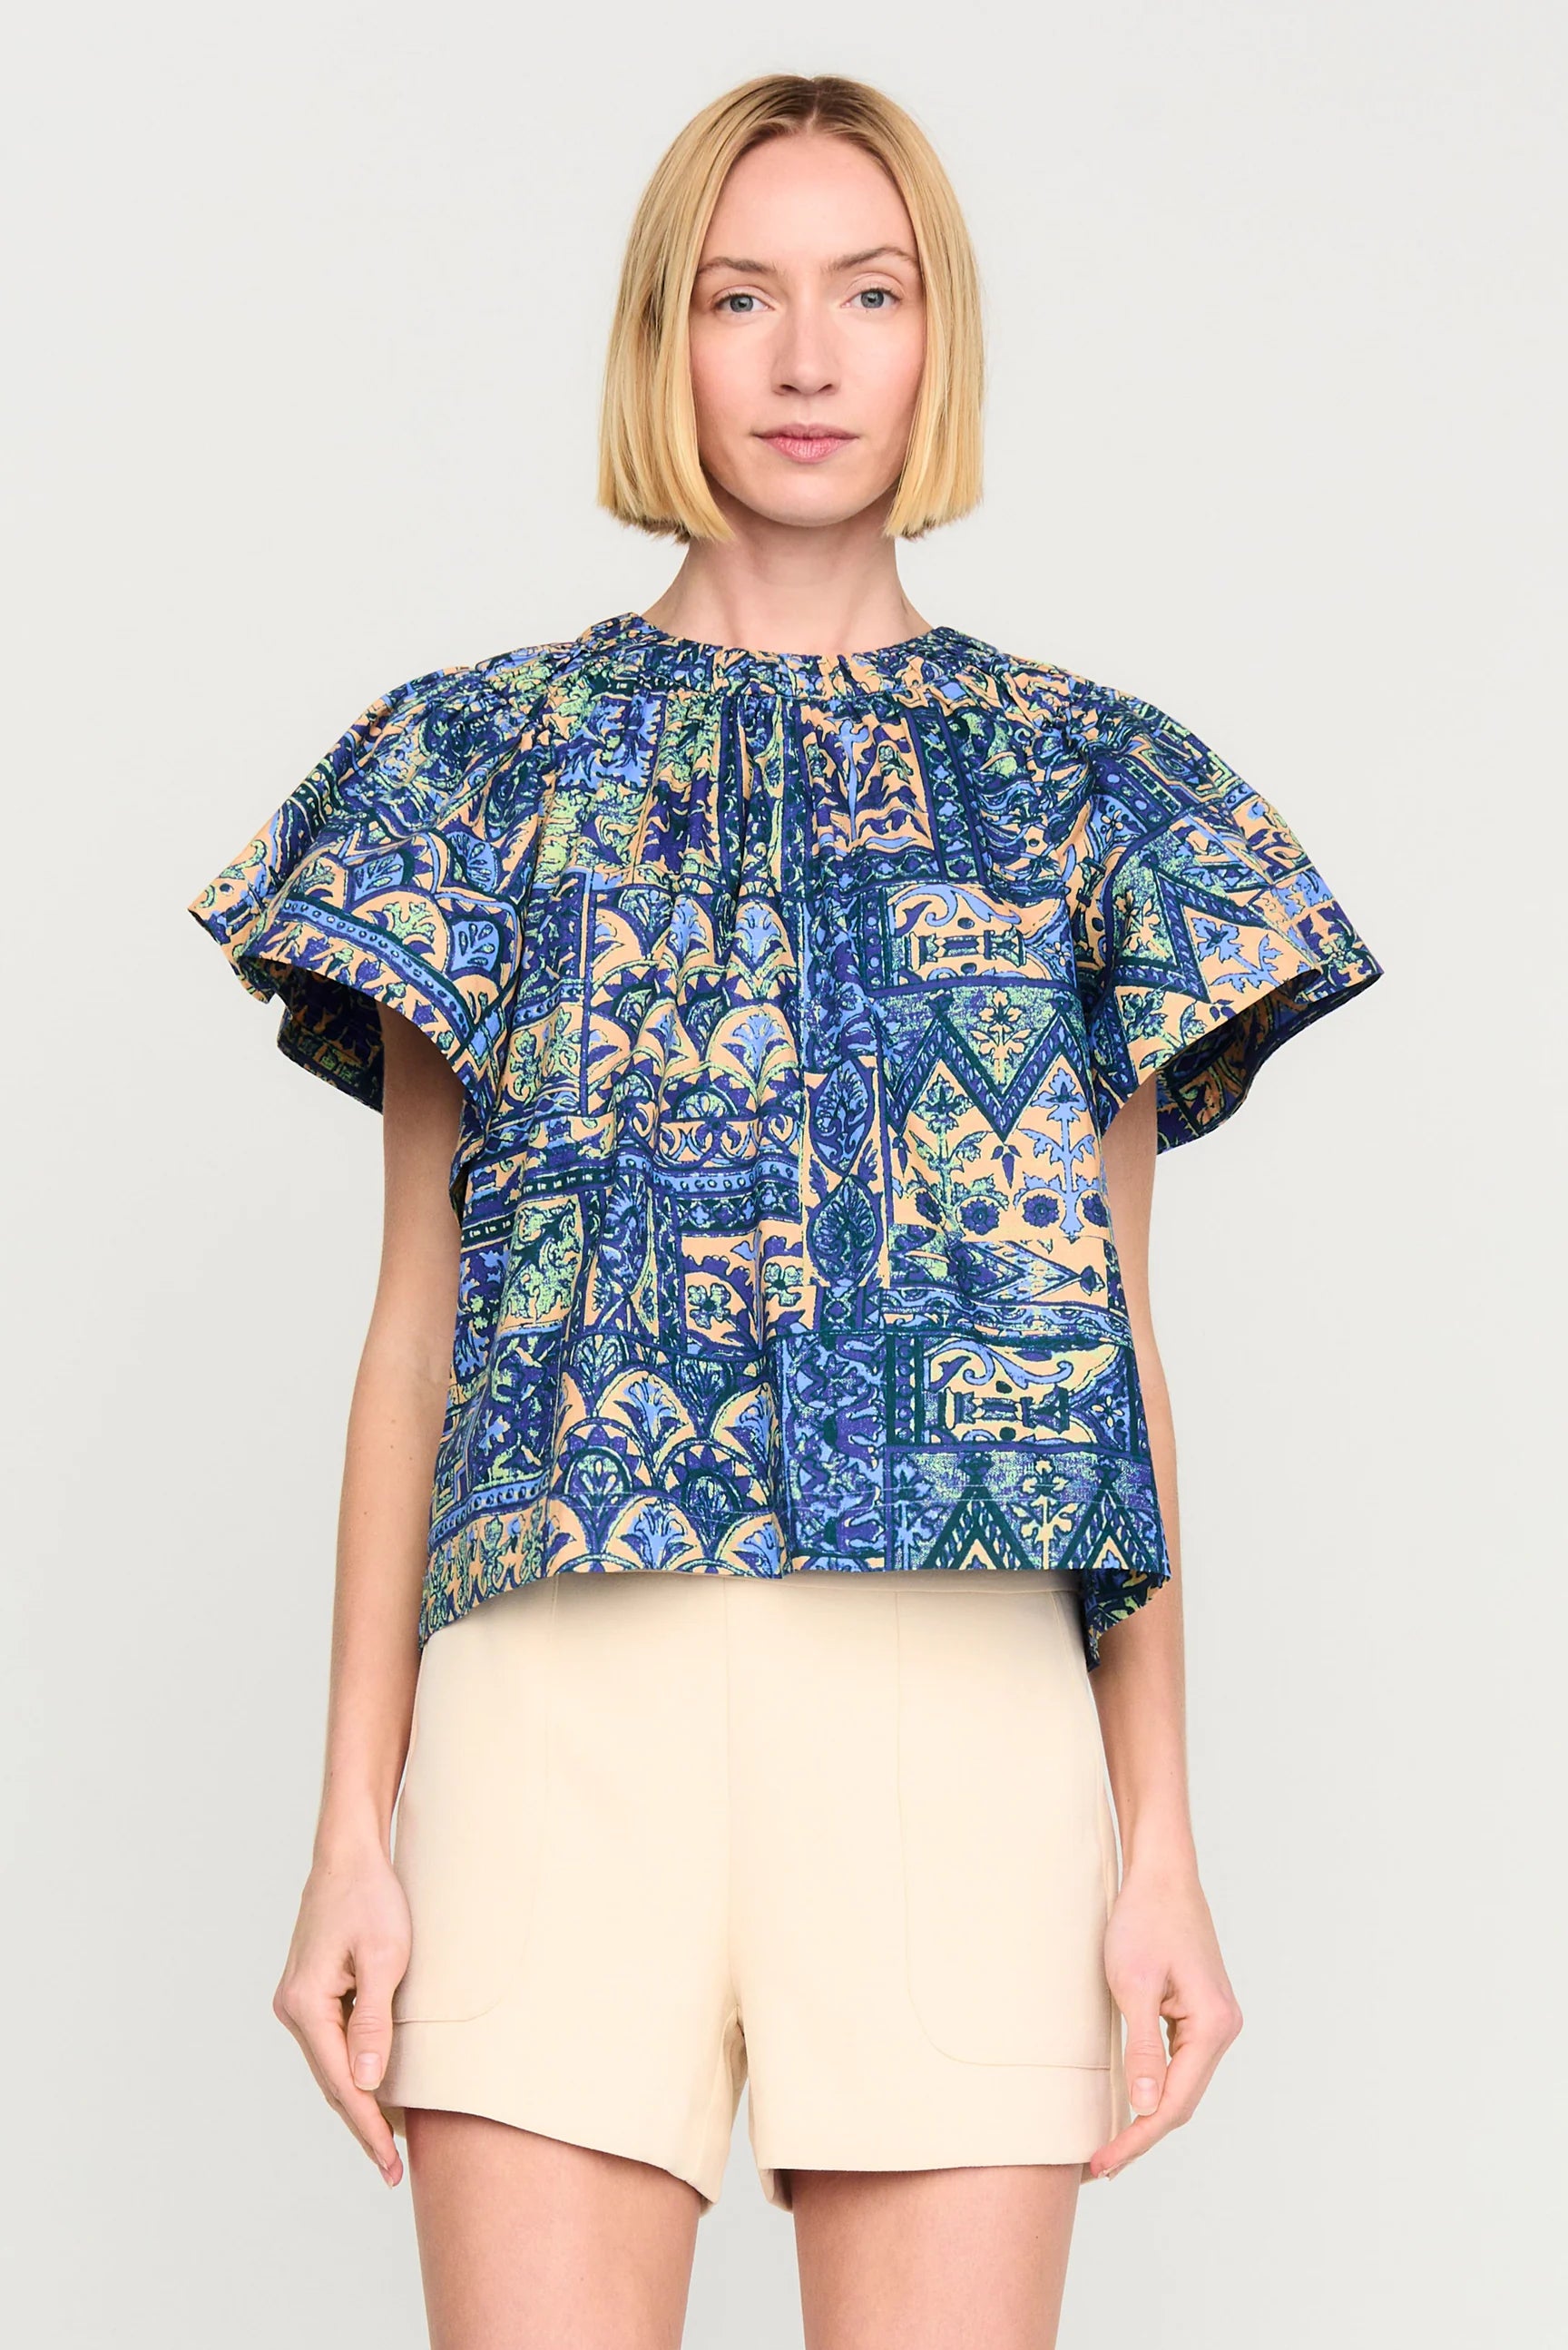 Marie Oliver Persey Top